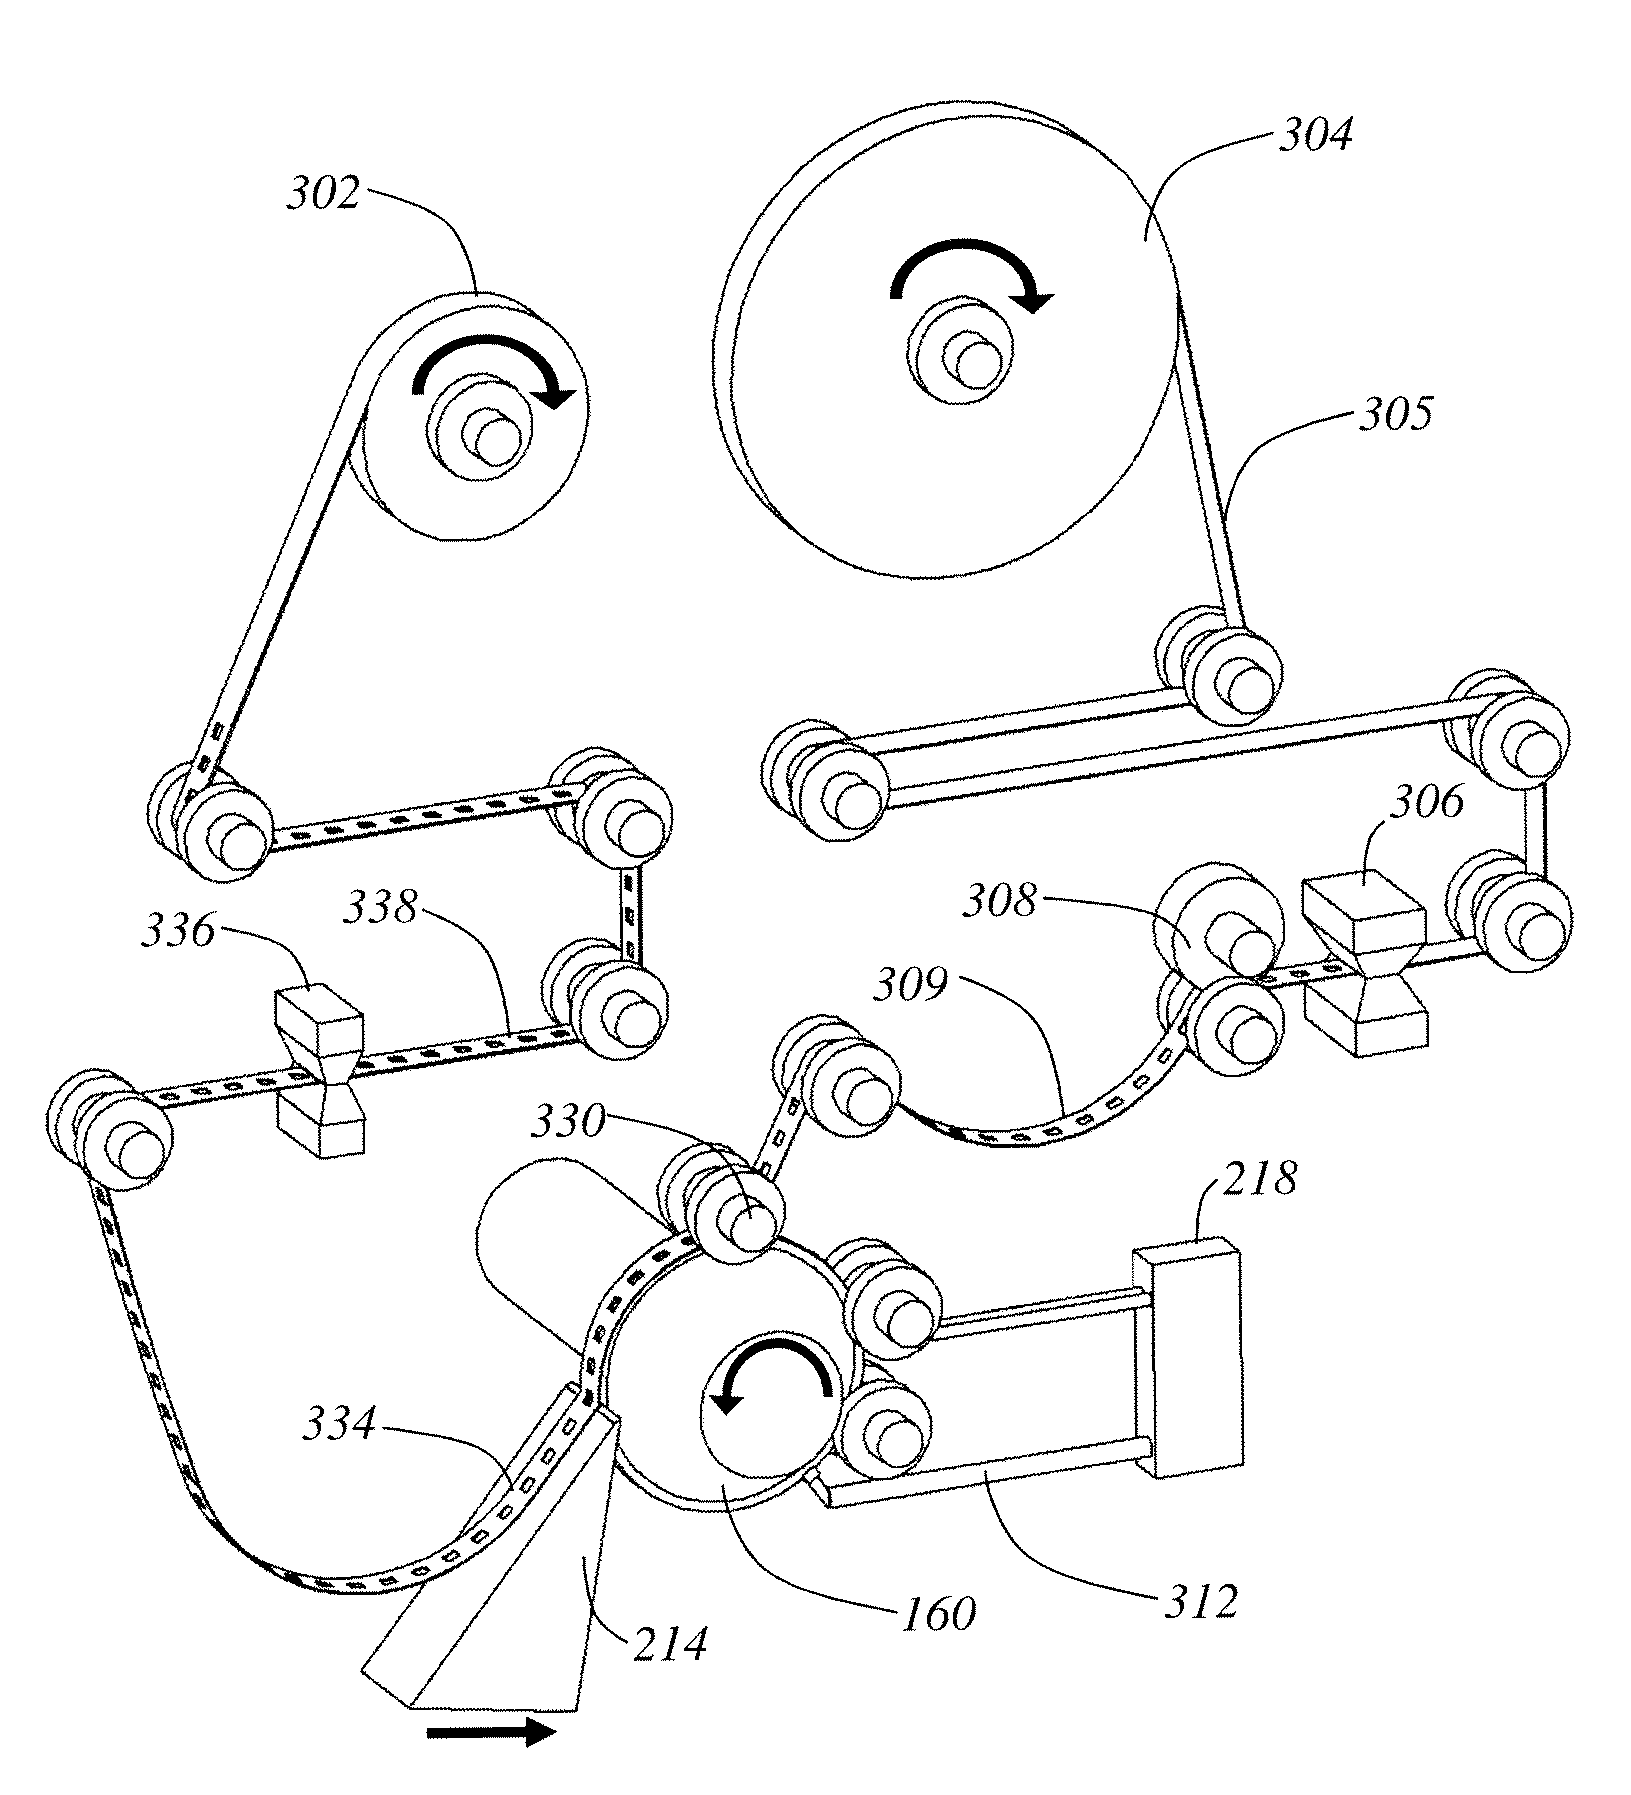 Methods, apparatuses and systems for collection of tissue sections